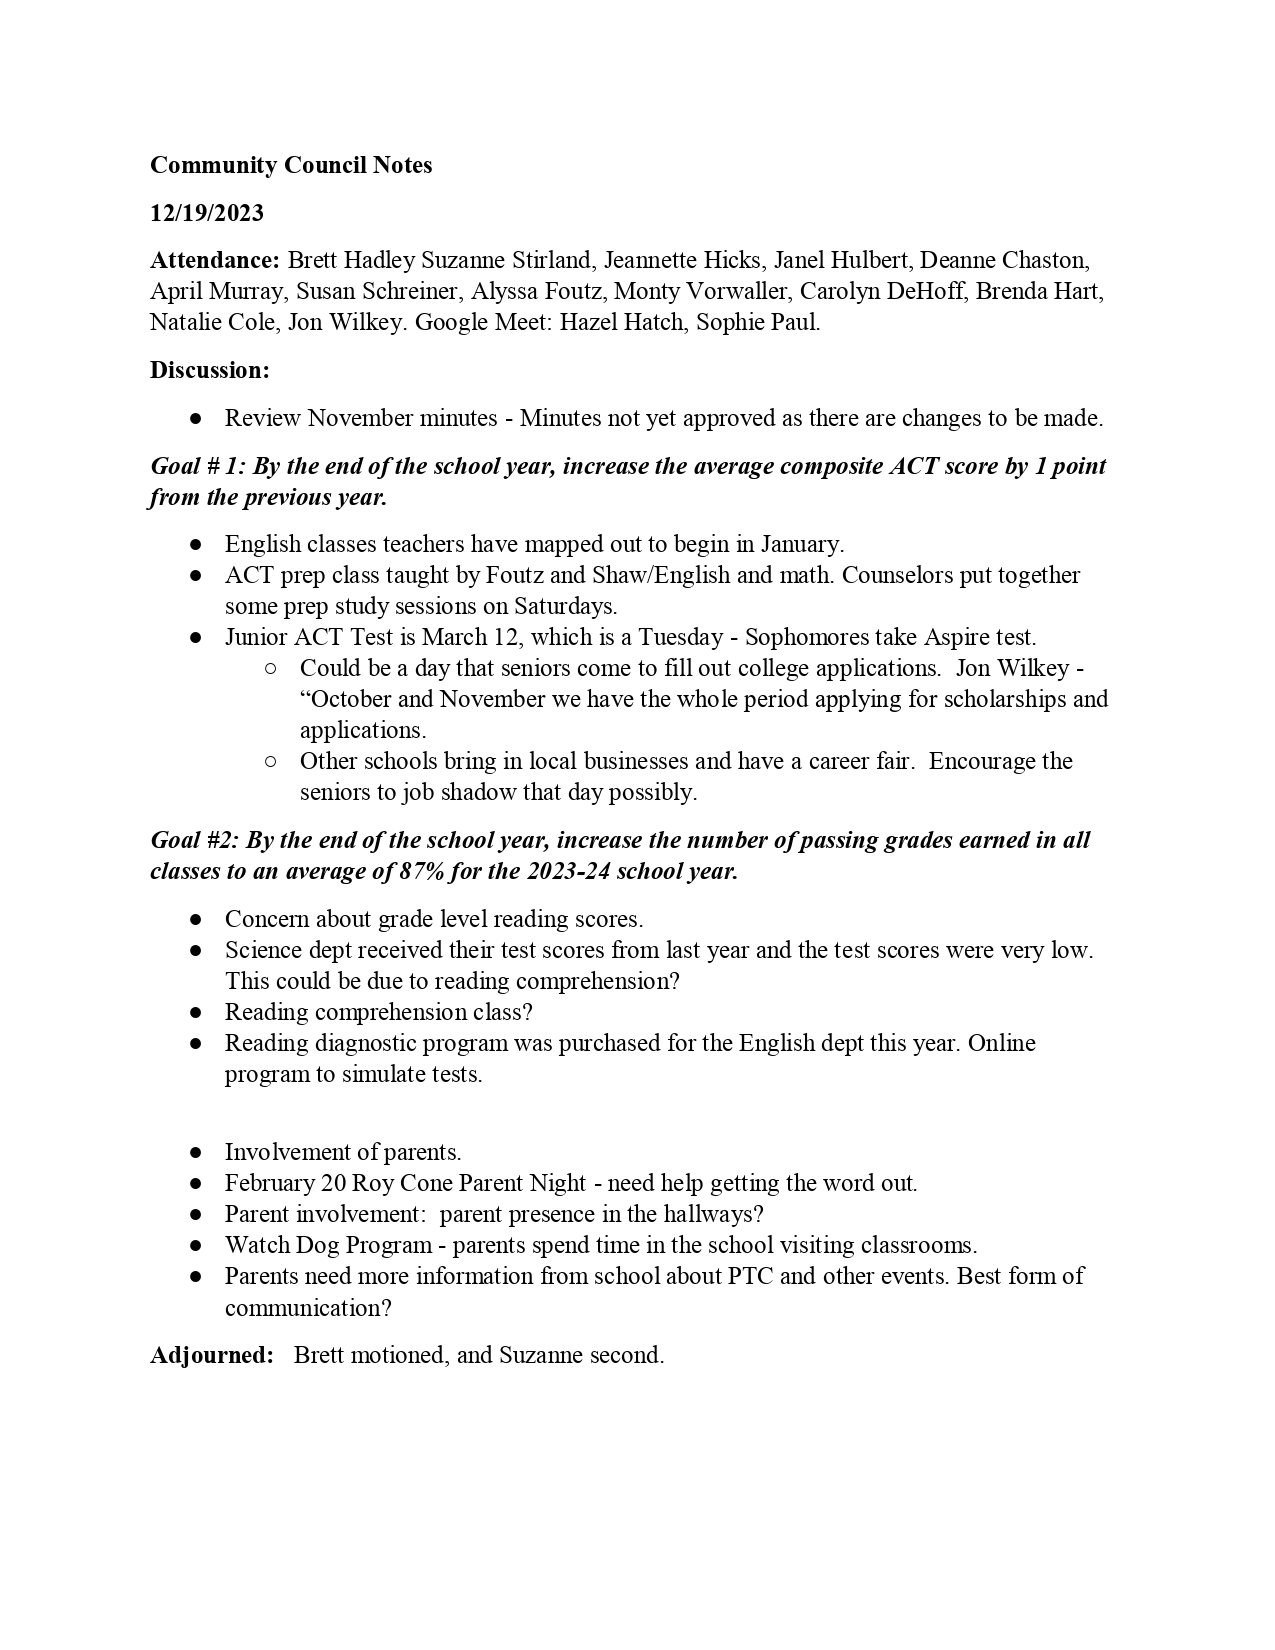 12.19.23 Community Council Notes page 0001